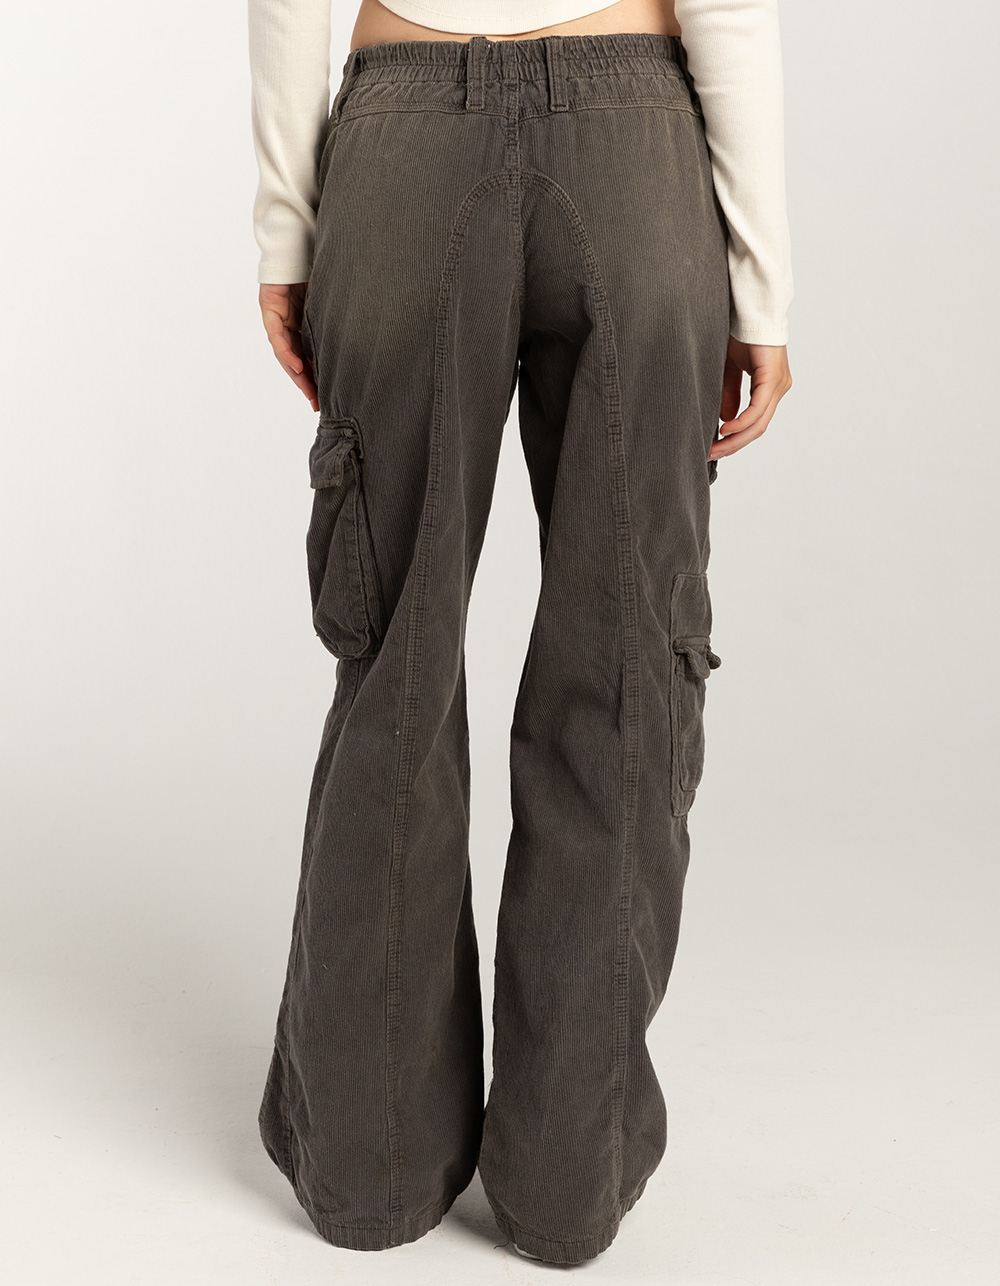 BDG Urban Outfitters Y2K Mid Rise Corduroy Womens Cargo Pants - CHARCOAL |  Tillys | Cargohosen